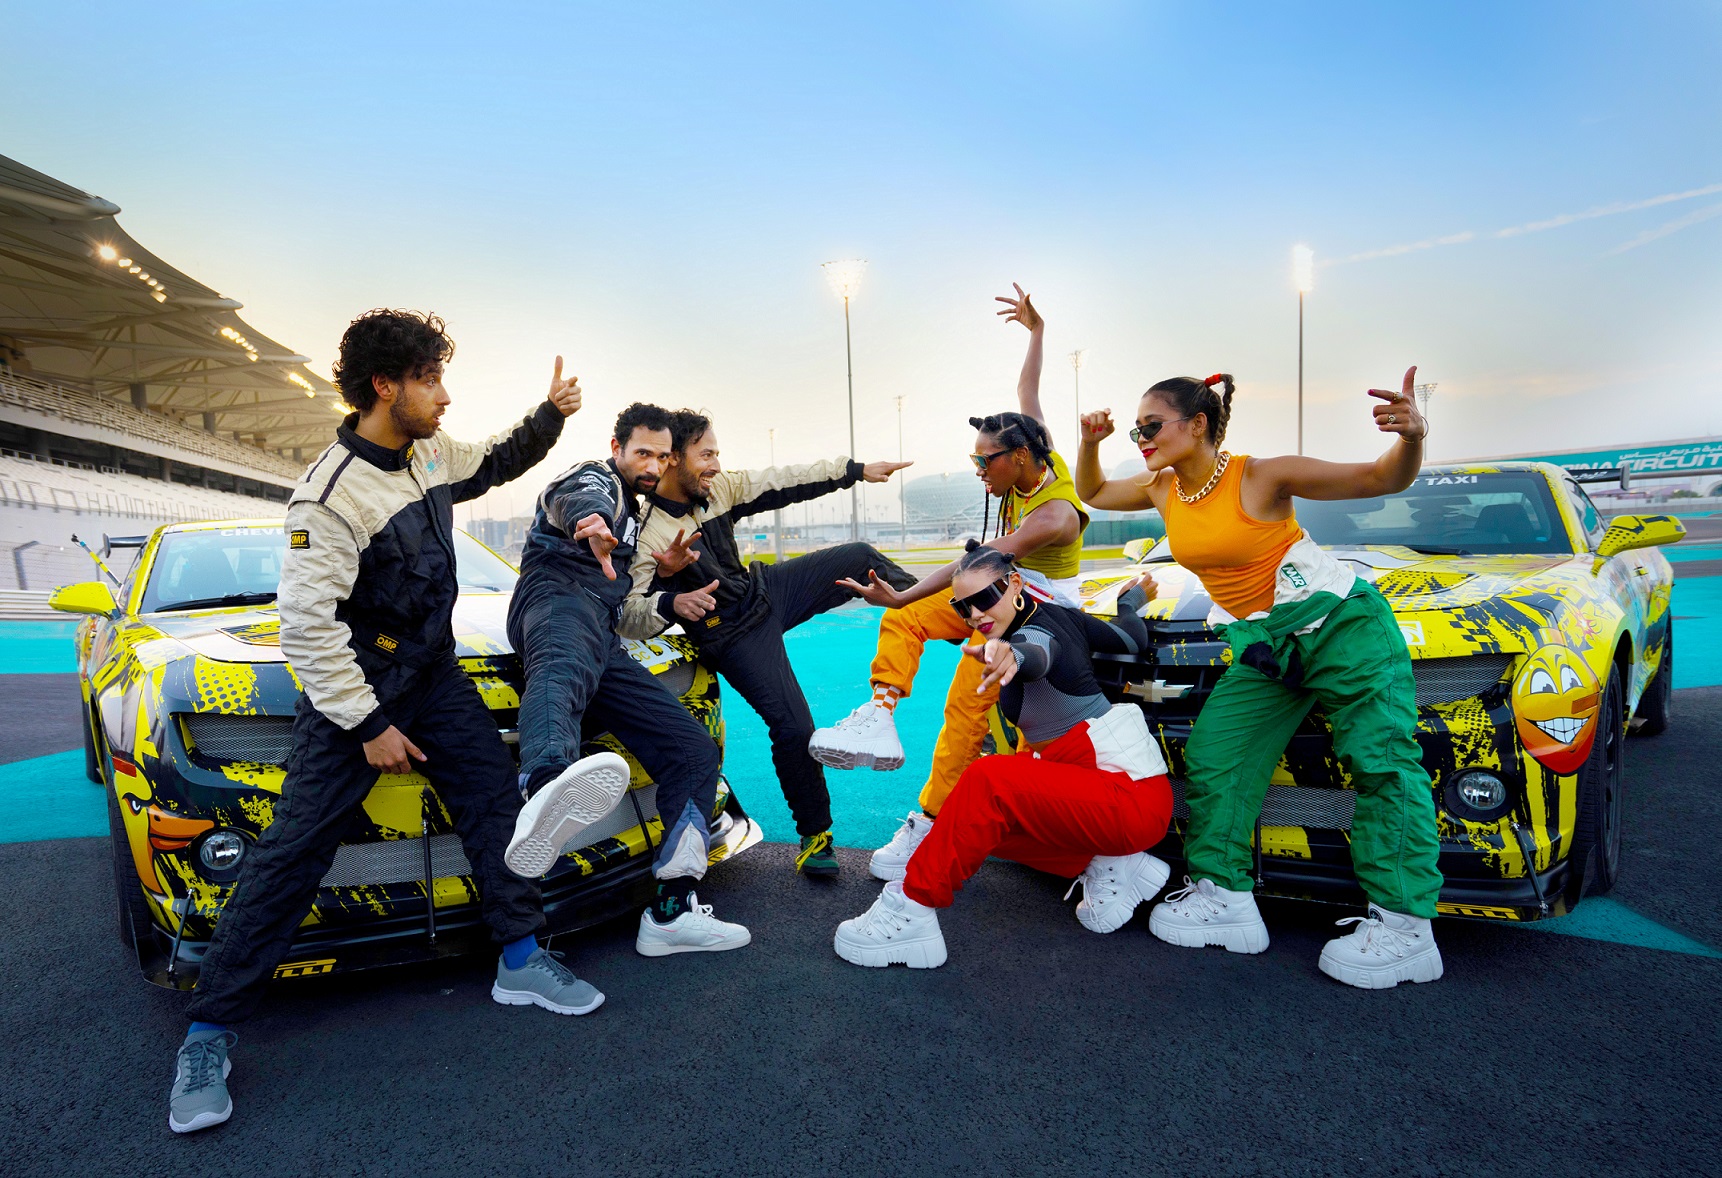 Yas Island’s ‘Yas Yas Baby’ goes viral with over 20 million views in less than 48 hours